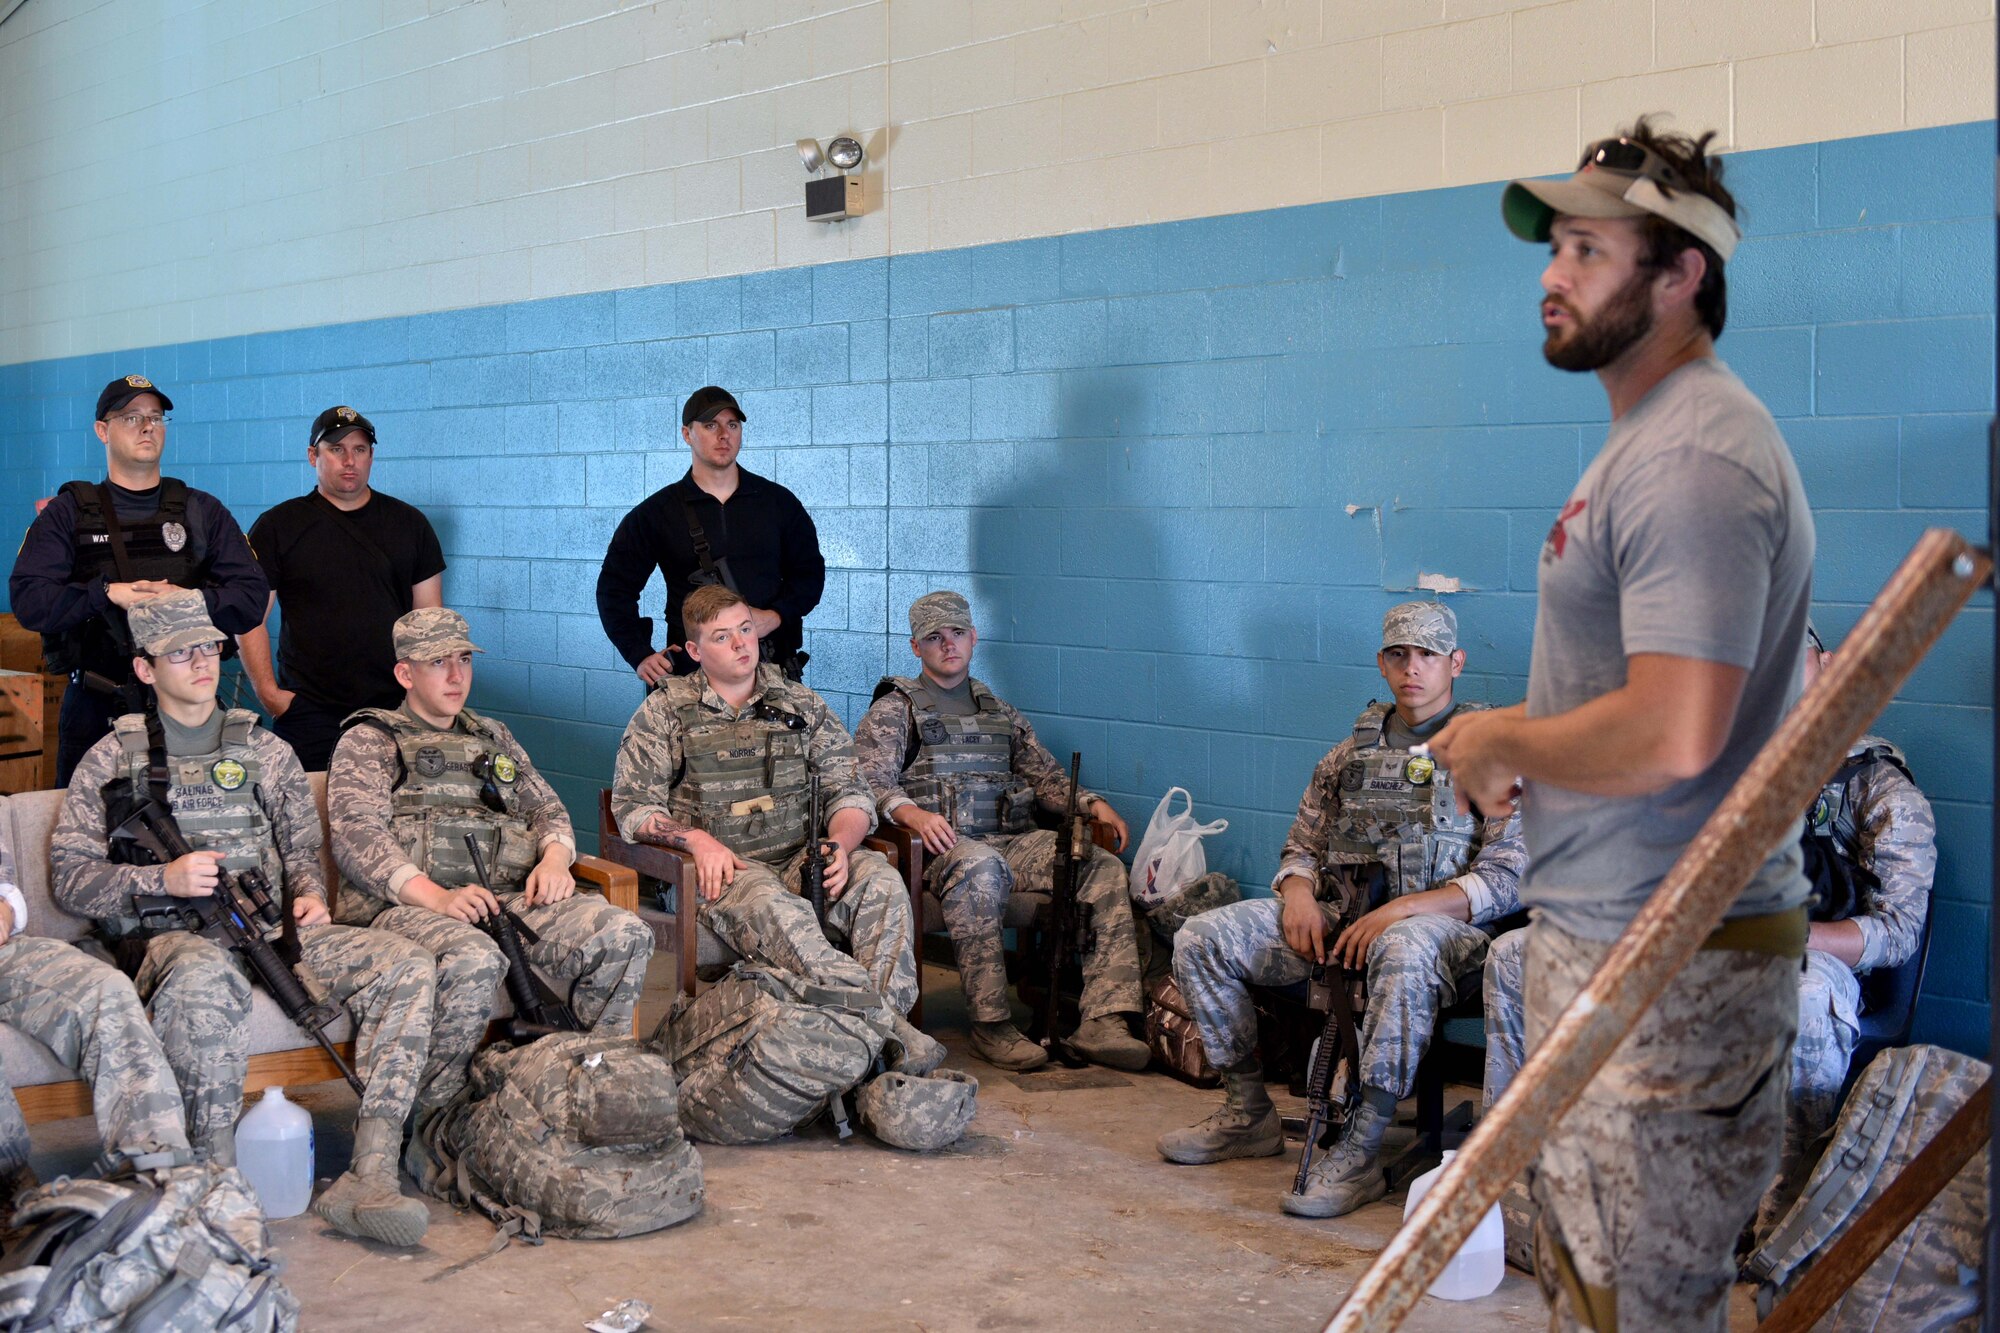 The Shooting Institute chief executive officer, Jared Hudson, briefs Goodfellow Air Force Base and Special Weapons and Tactics team members before performing maneuvers during the SWAT and Close Quarters Combat training at the Eldorado Air Force Station in Eldorado, Texas, May 10, 2018. The students learned the basics of approach, breaching, deliberate vs. dynamic movement, threat identification and how to use pistols and rifles in CQC environments. (U.S. Air Force photo by Senior Airman Randall Moose/Released)